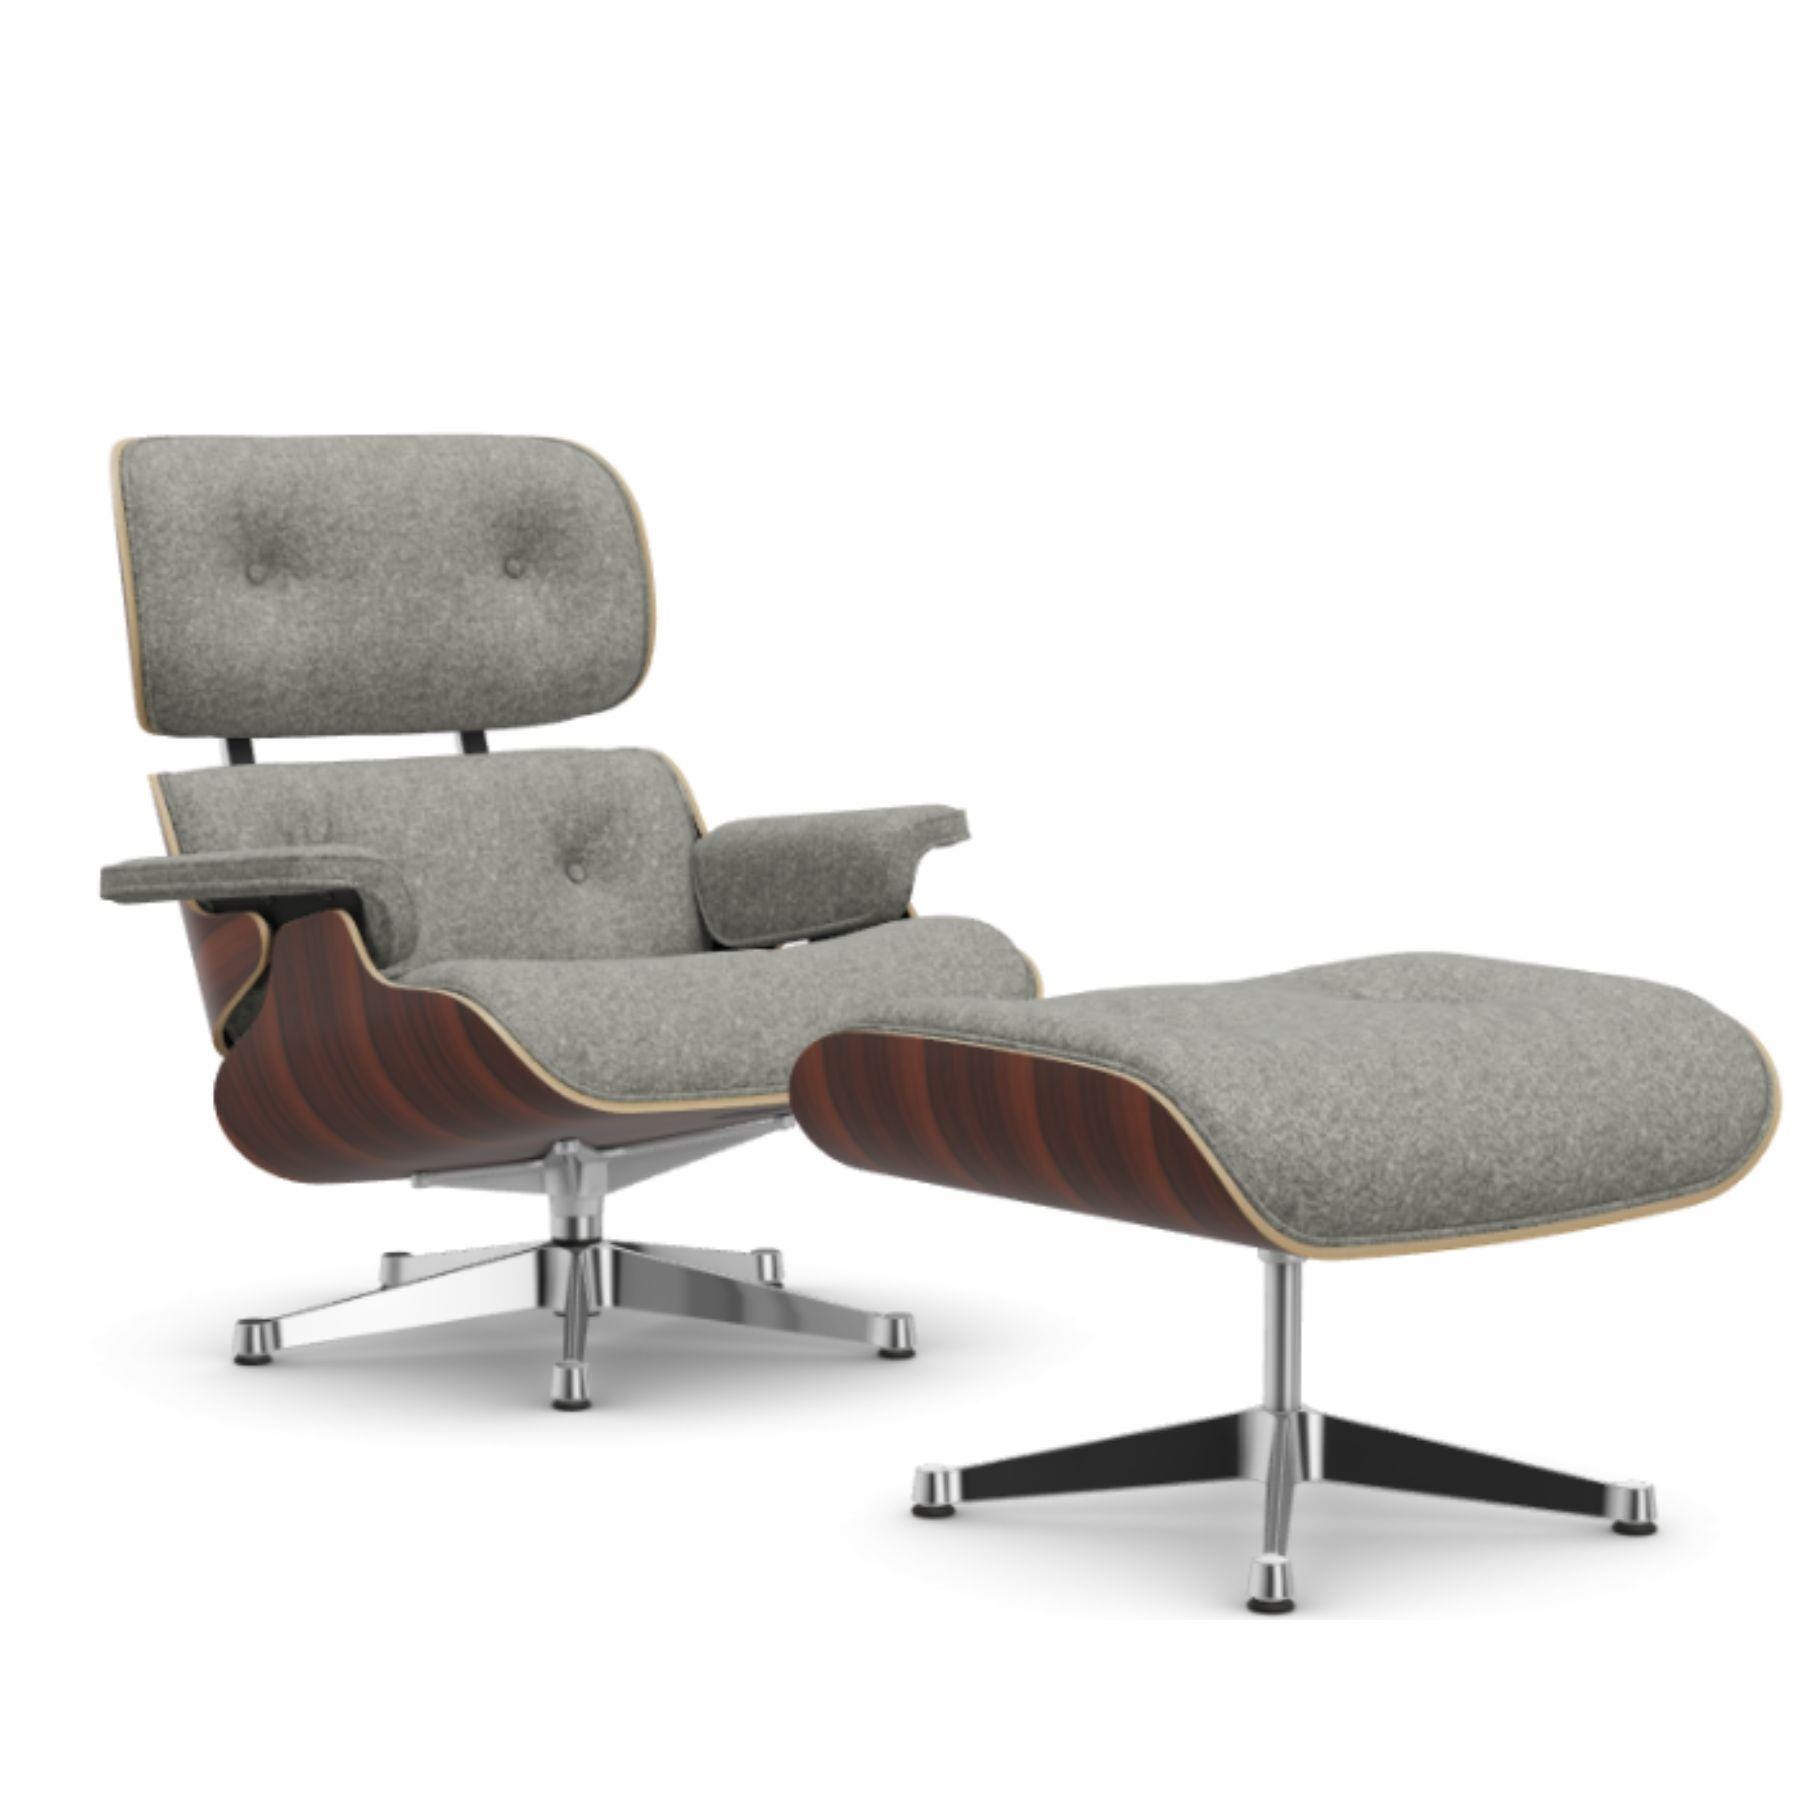 Vitra Eames Classic Lounge Chair Santos Palisander Nubia Cream And Dark Brown Polished Aluminium With Ottoman Light Wood Designer Furniture From